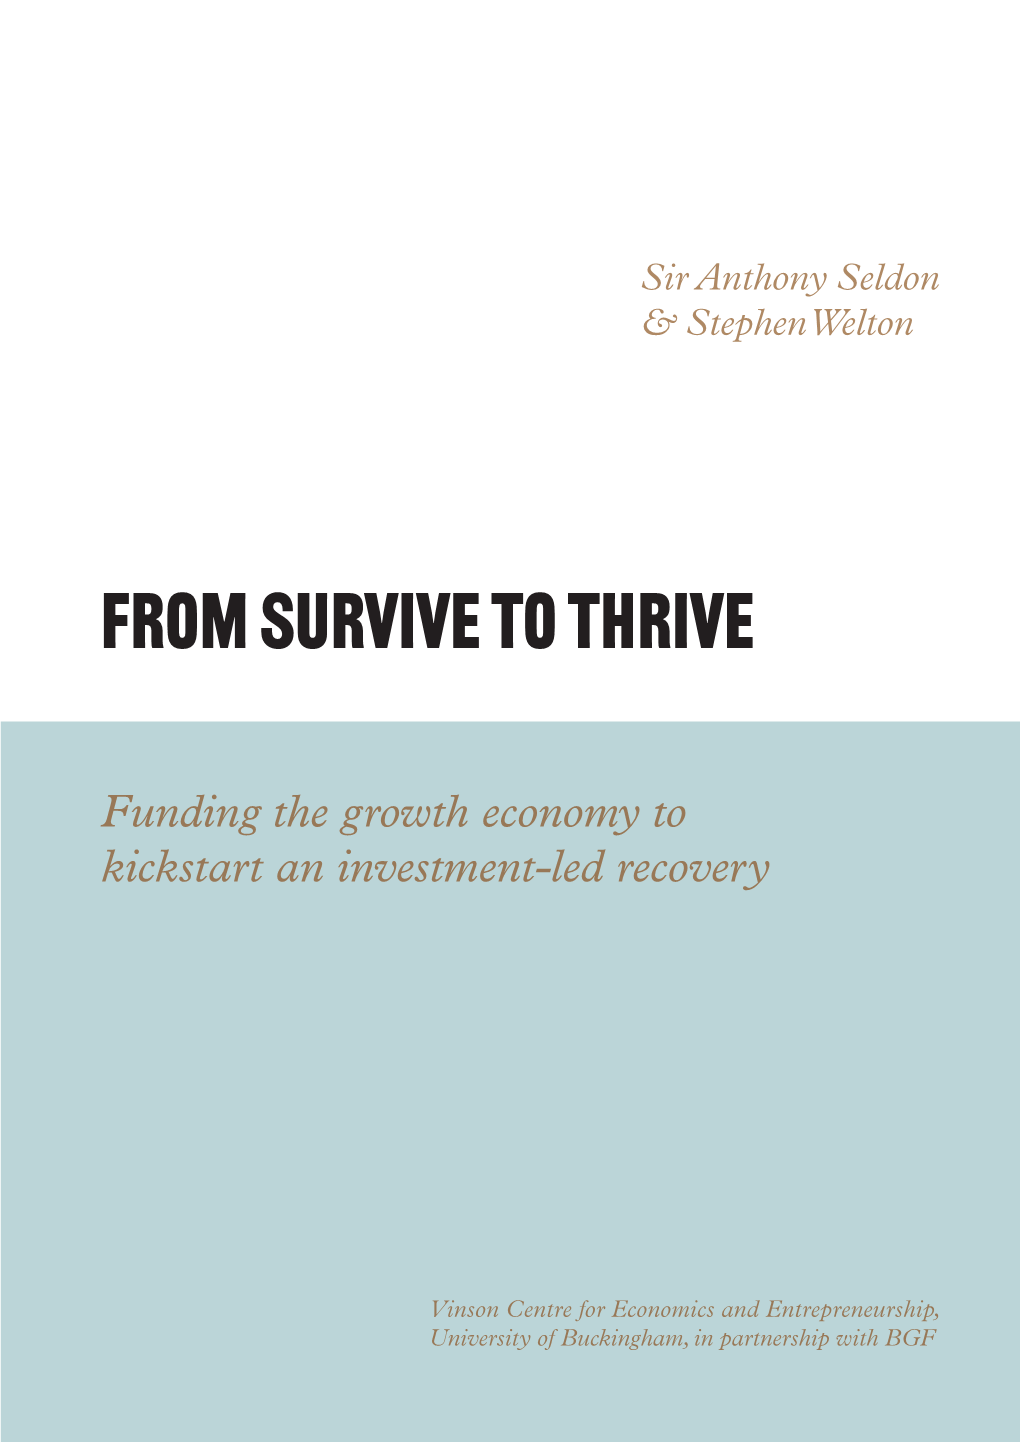 From Survive to Thrive – Funding the Growth Economy to Kickstart